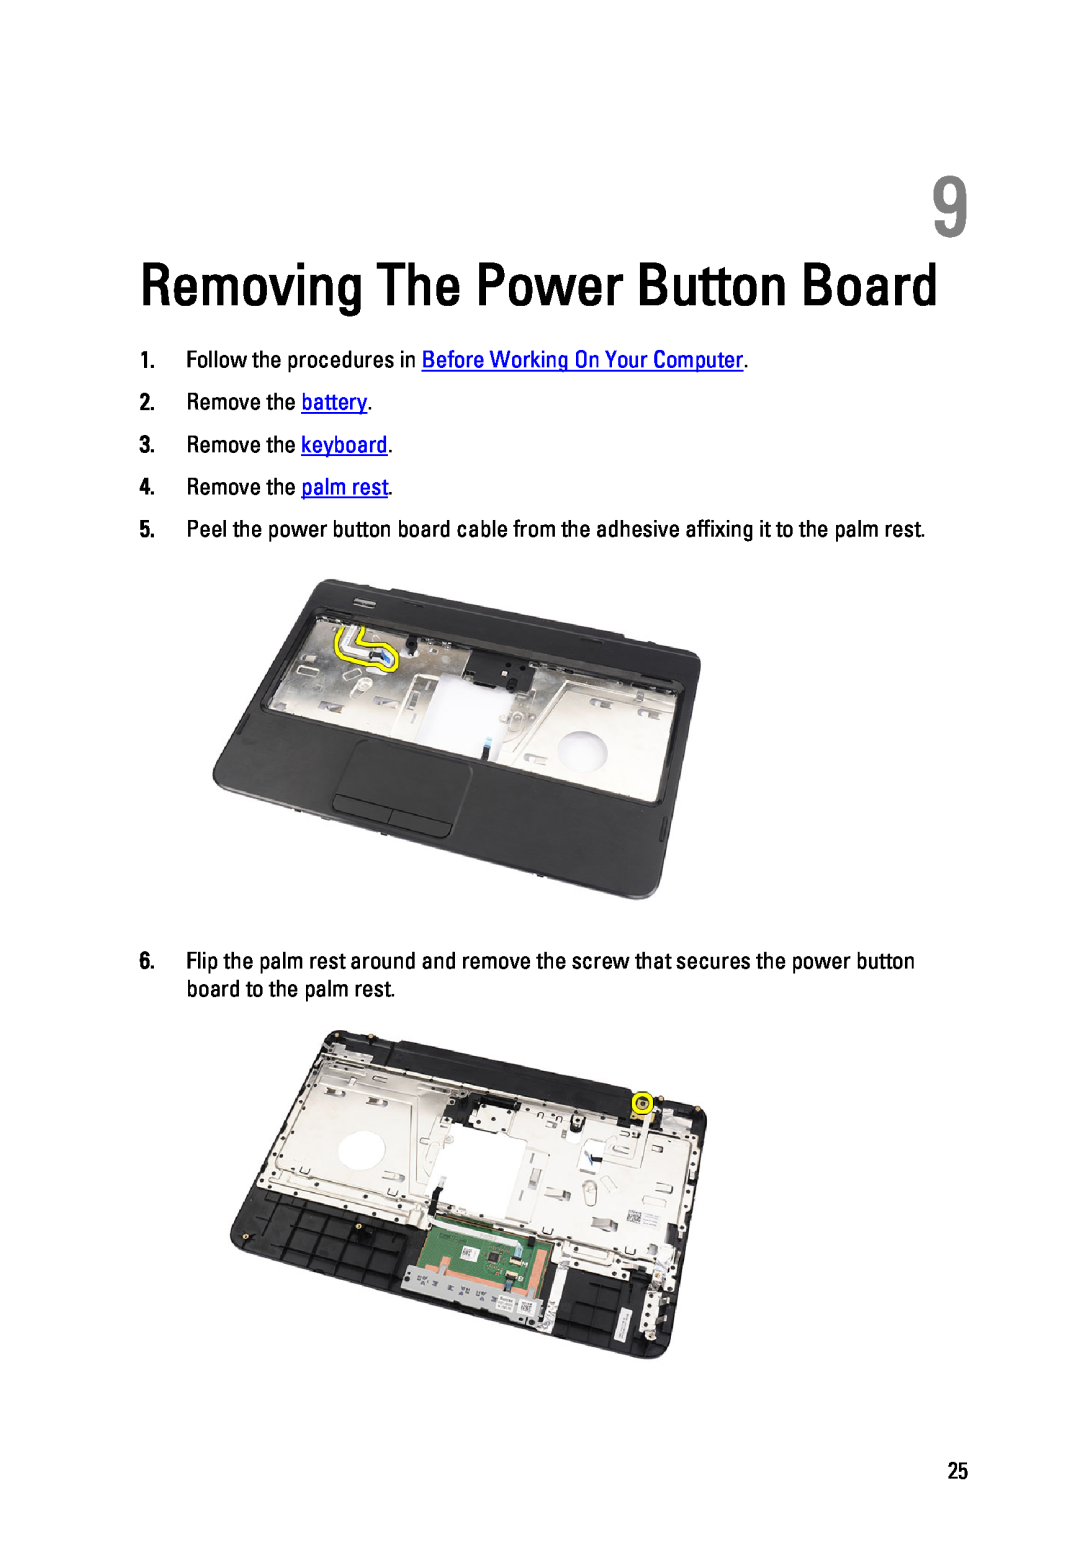 Dell P22G owner manual Removing The Power Button Board, Follow the procedures in Before Working On Your Computer 